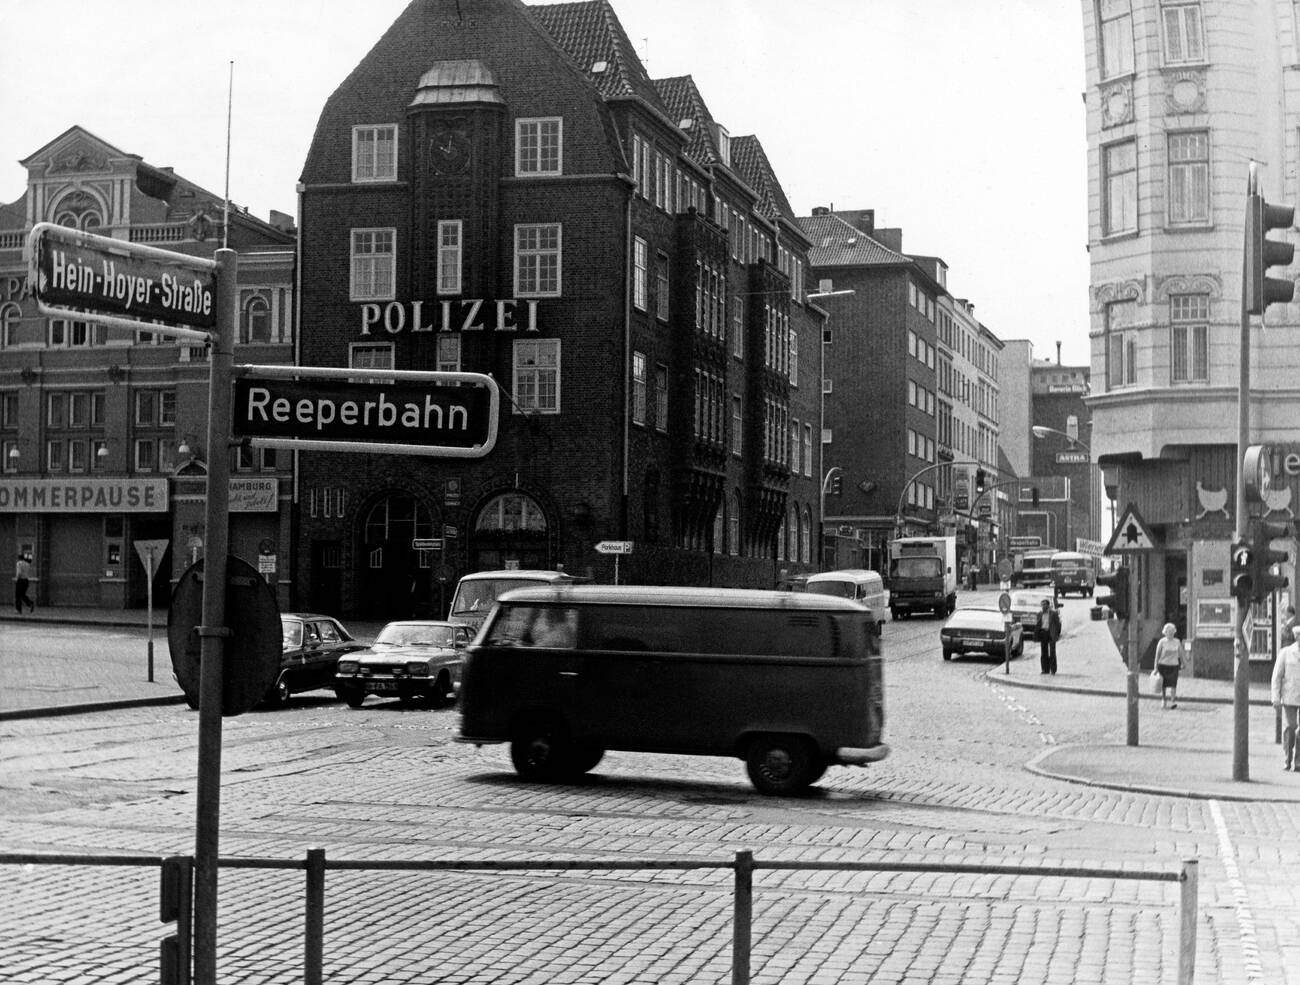 Hein Hoyer street and Reeperbahn with Davidwache police department at Hamburg, Germany in the 1970s.